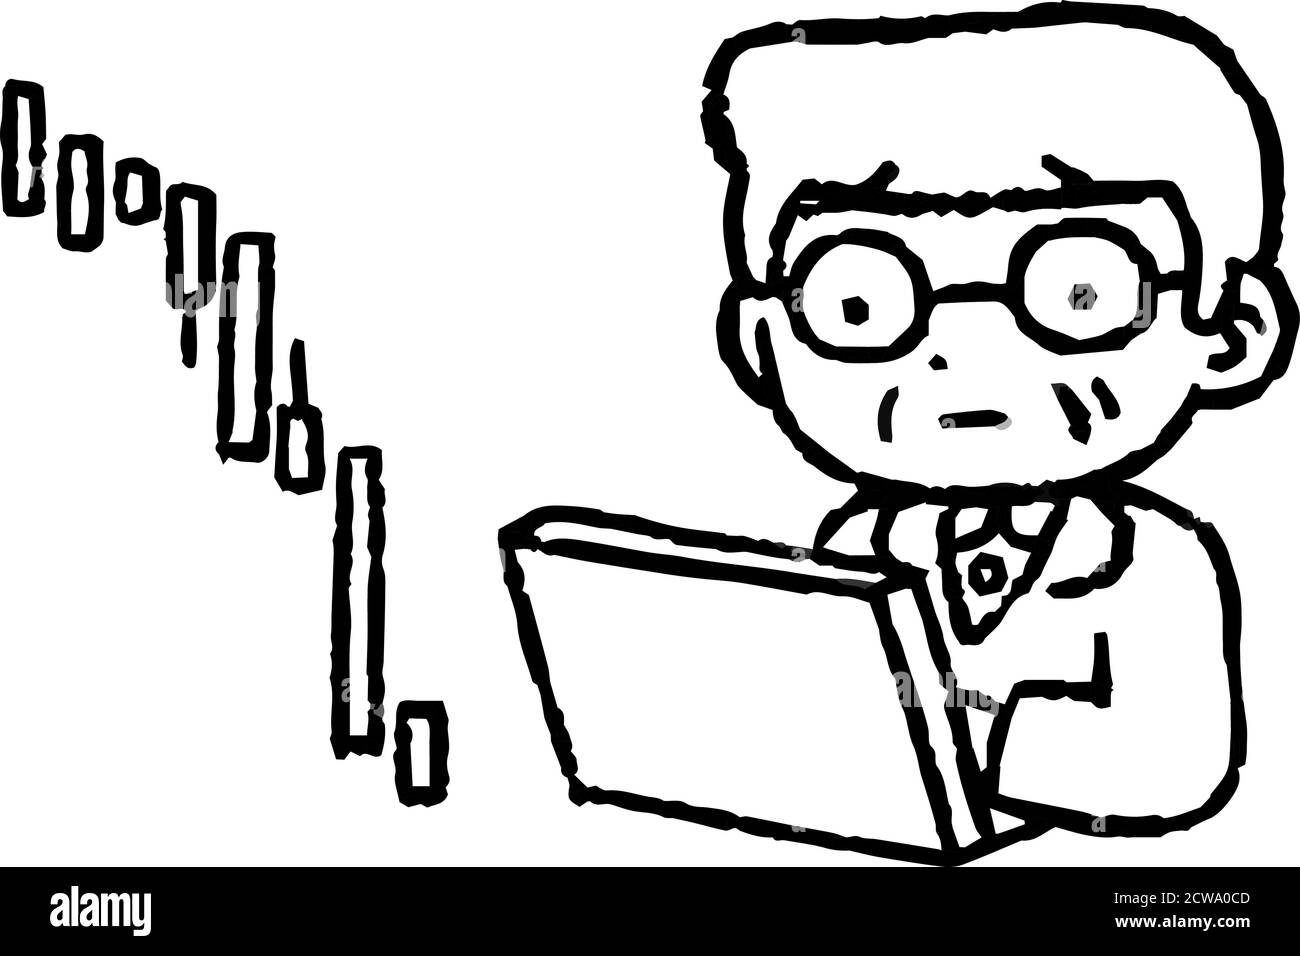 This is a illustration of Monochrome Old man losing money on investment Stock Vector